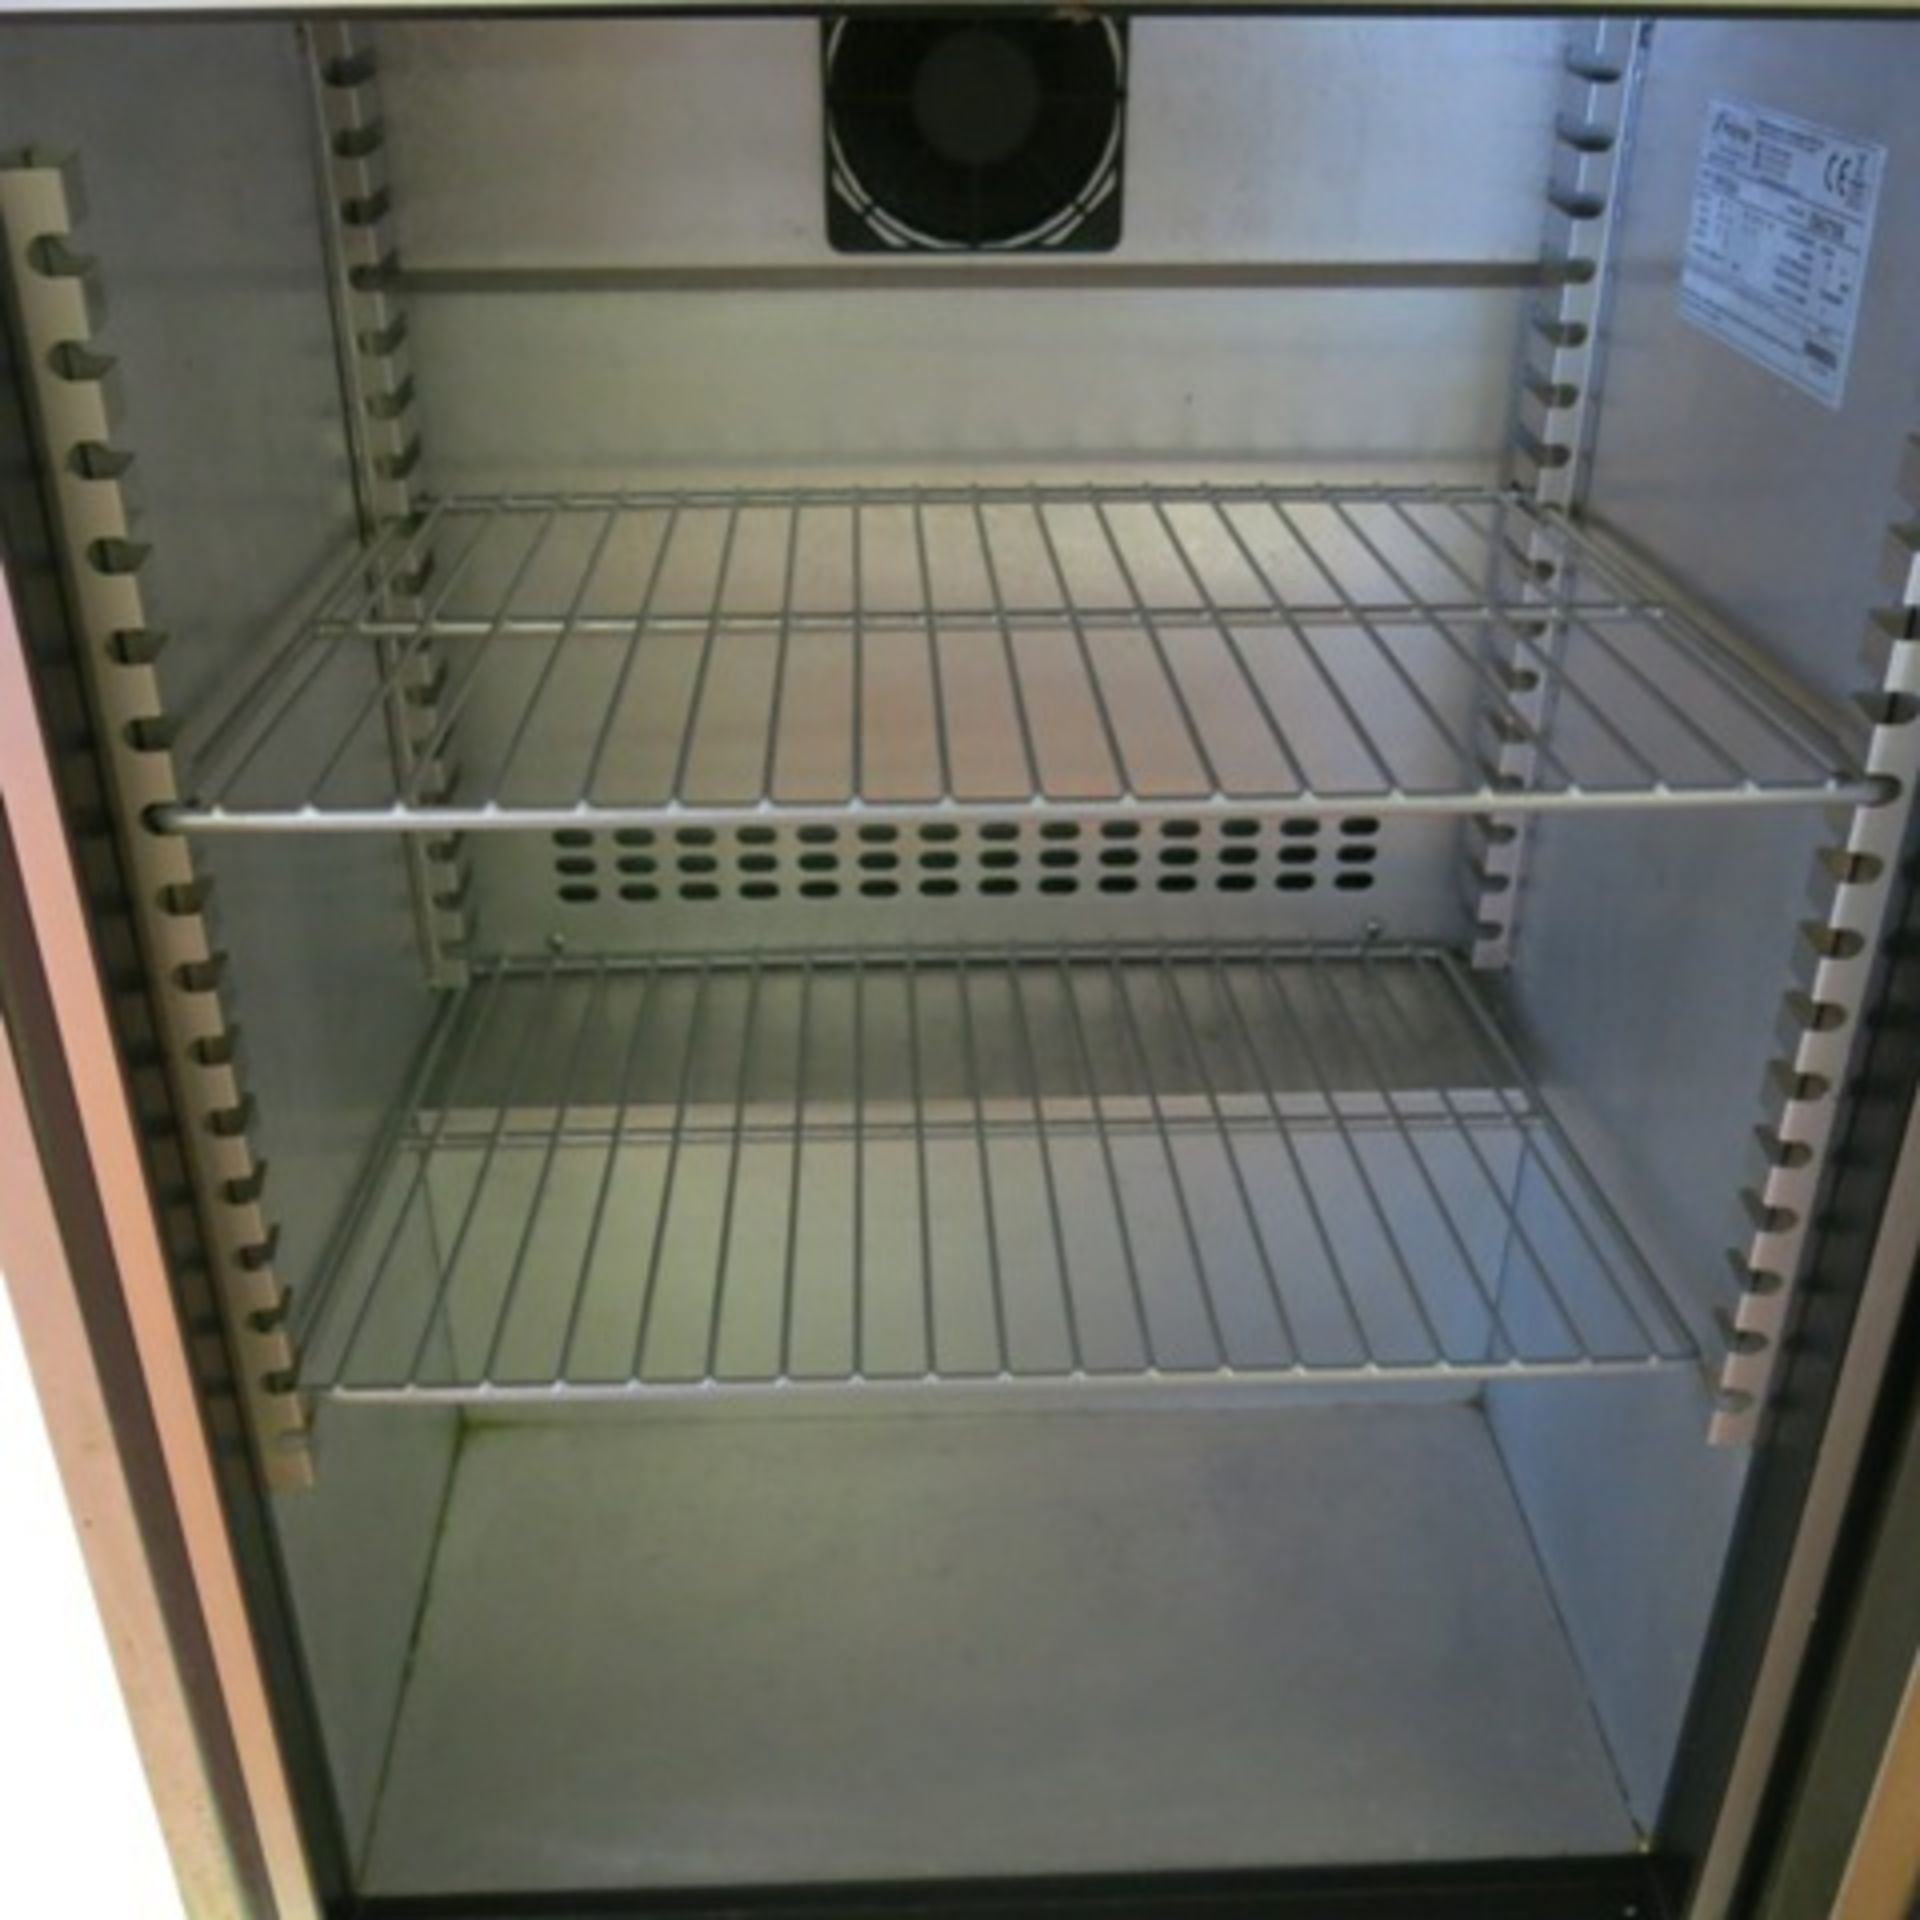 Foster Undercounter Stainless Steel Fridge, Model HR150-A - Image 4 of 5